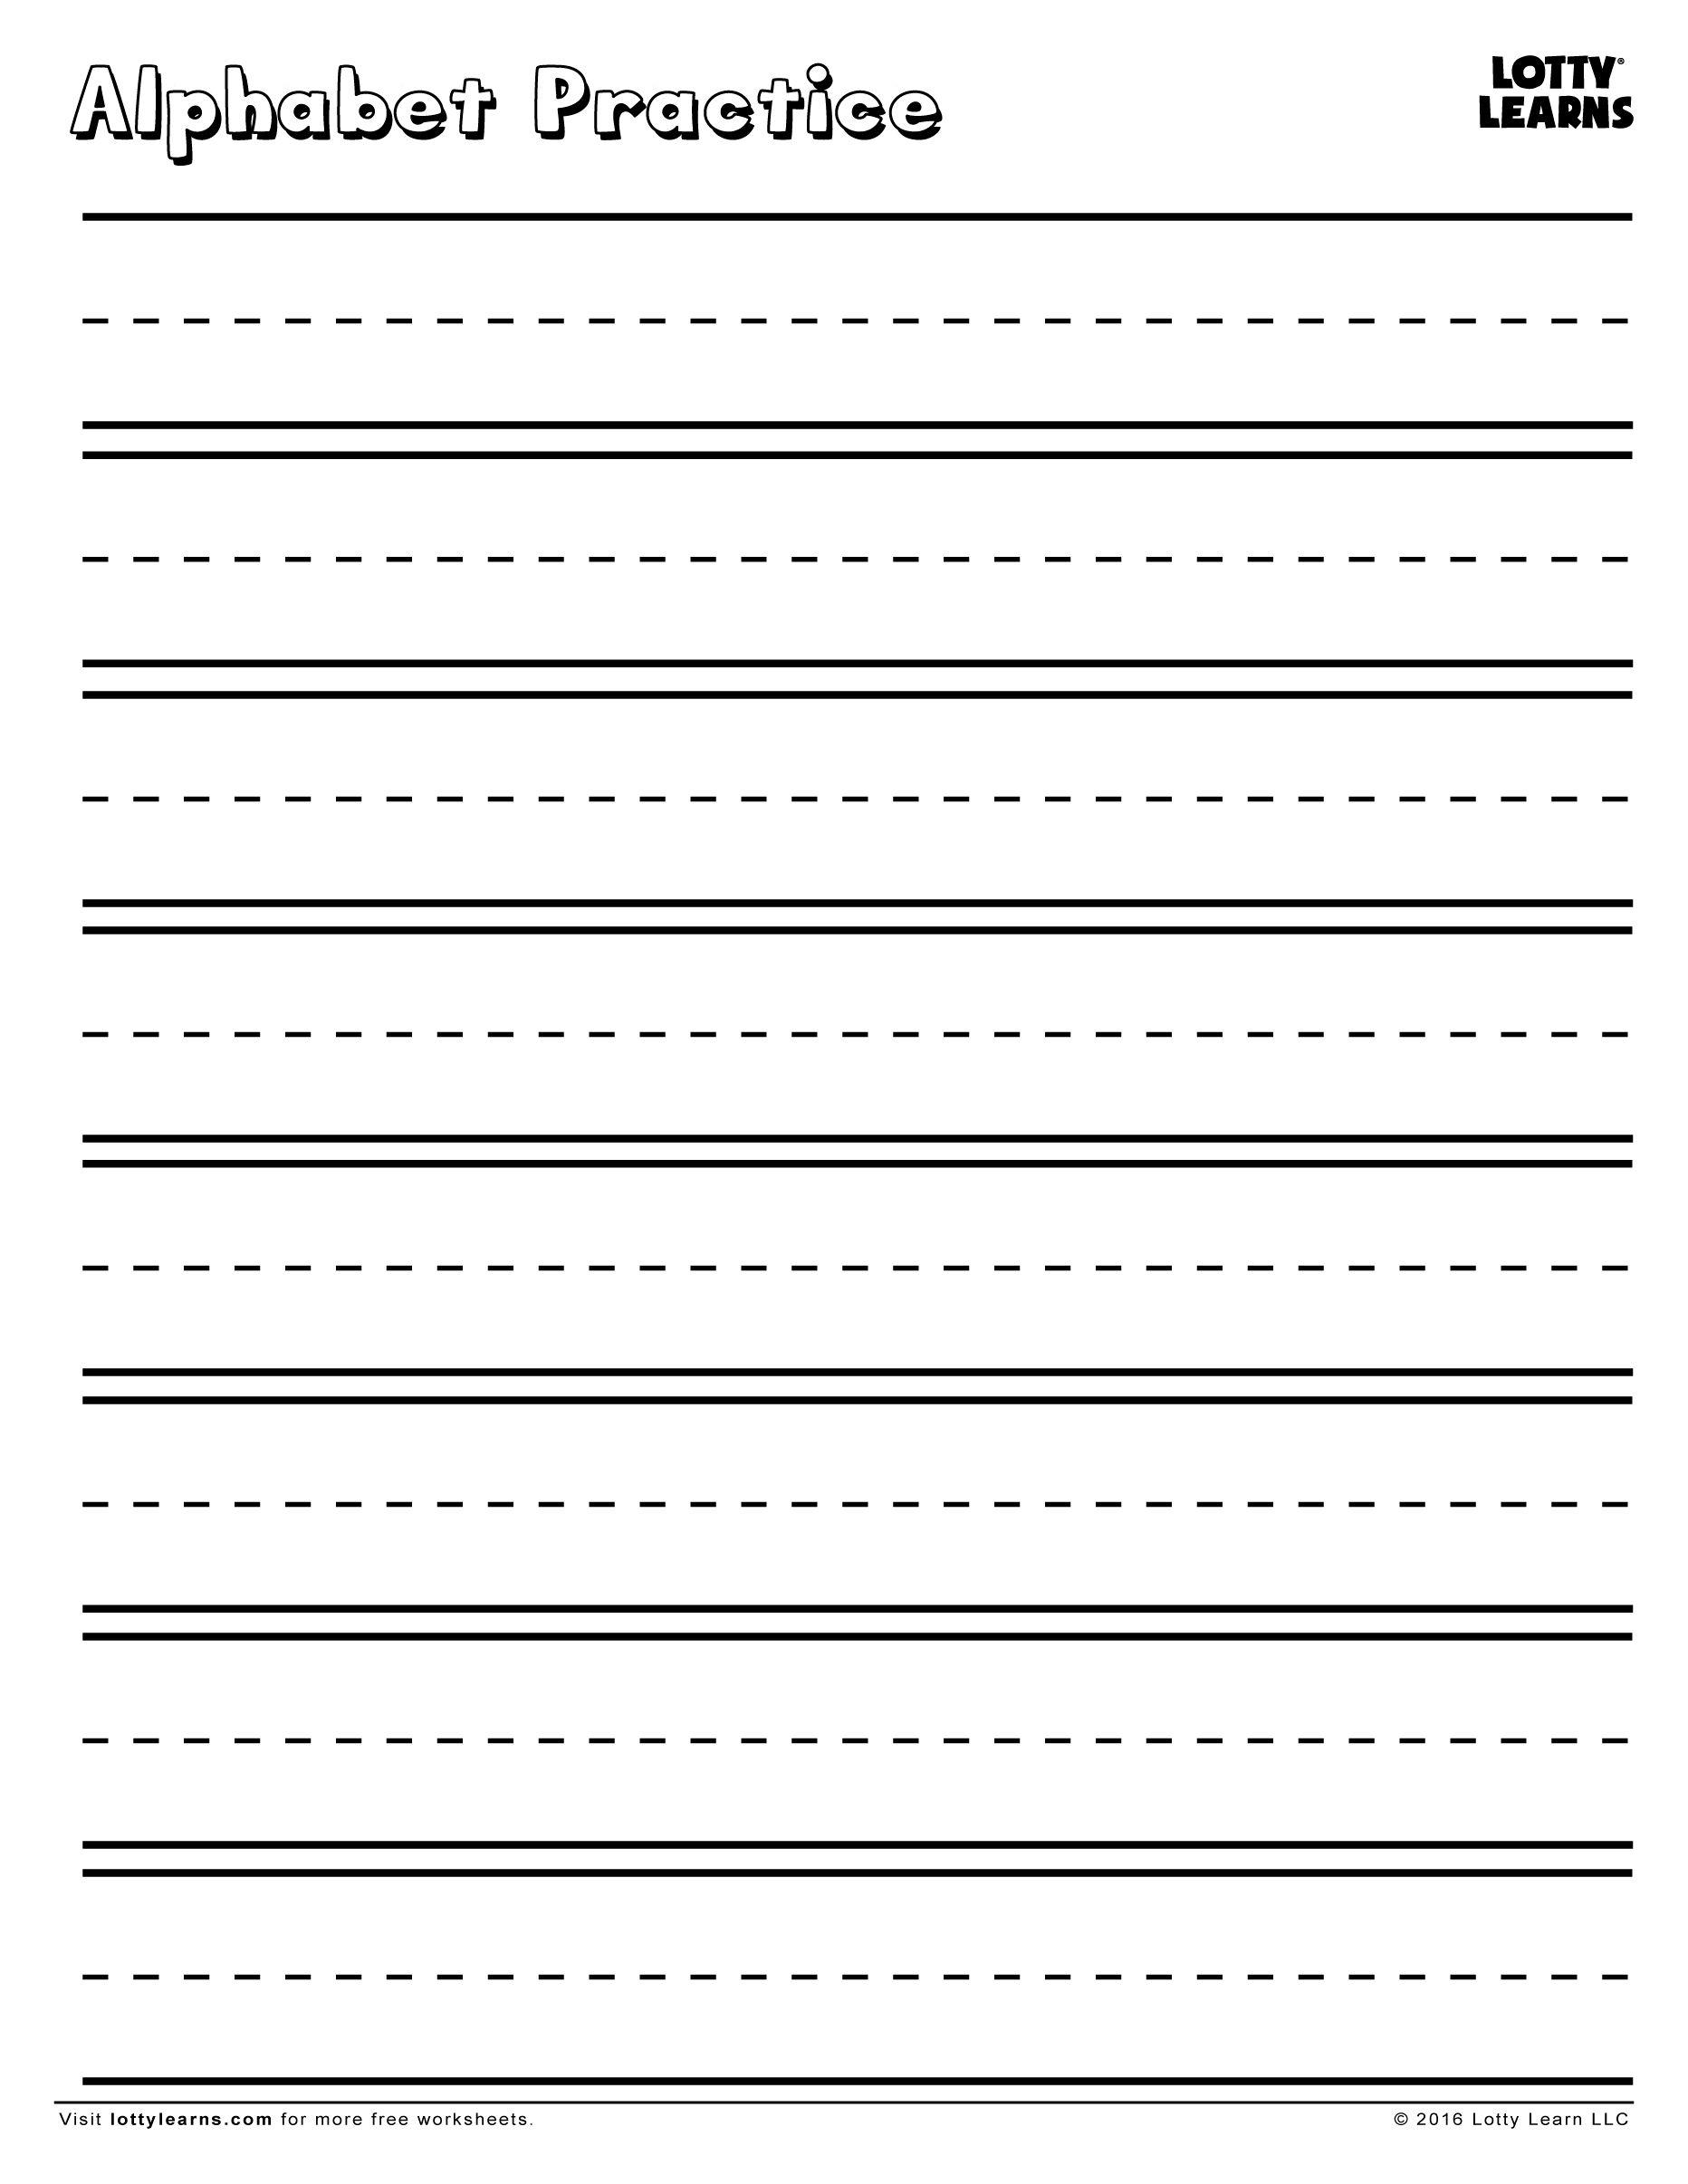 Practice Makes Perfect! Blank Alphabet Practice Sheet in Name Tracing With Blank Lines